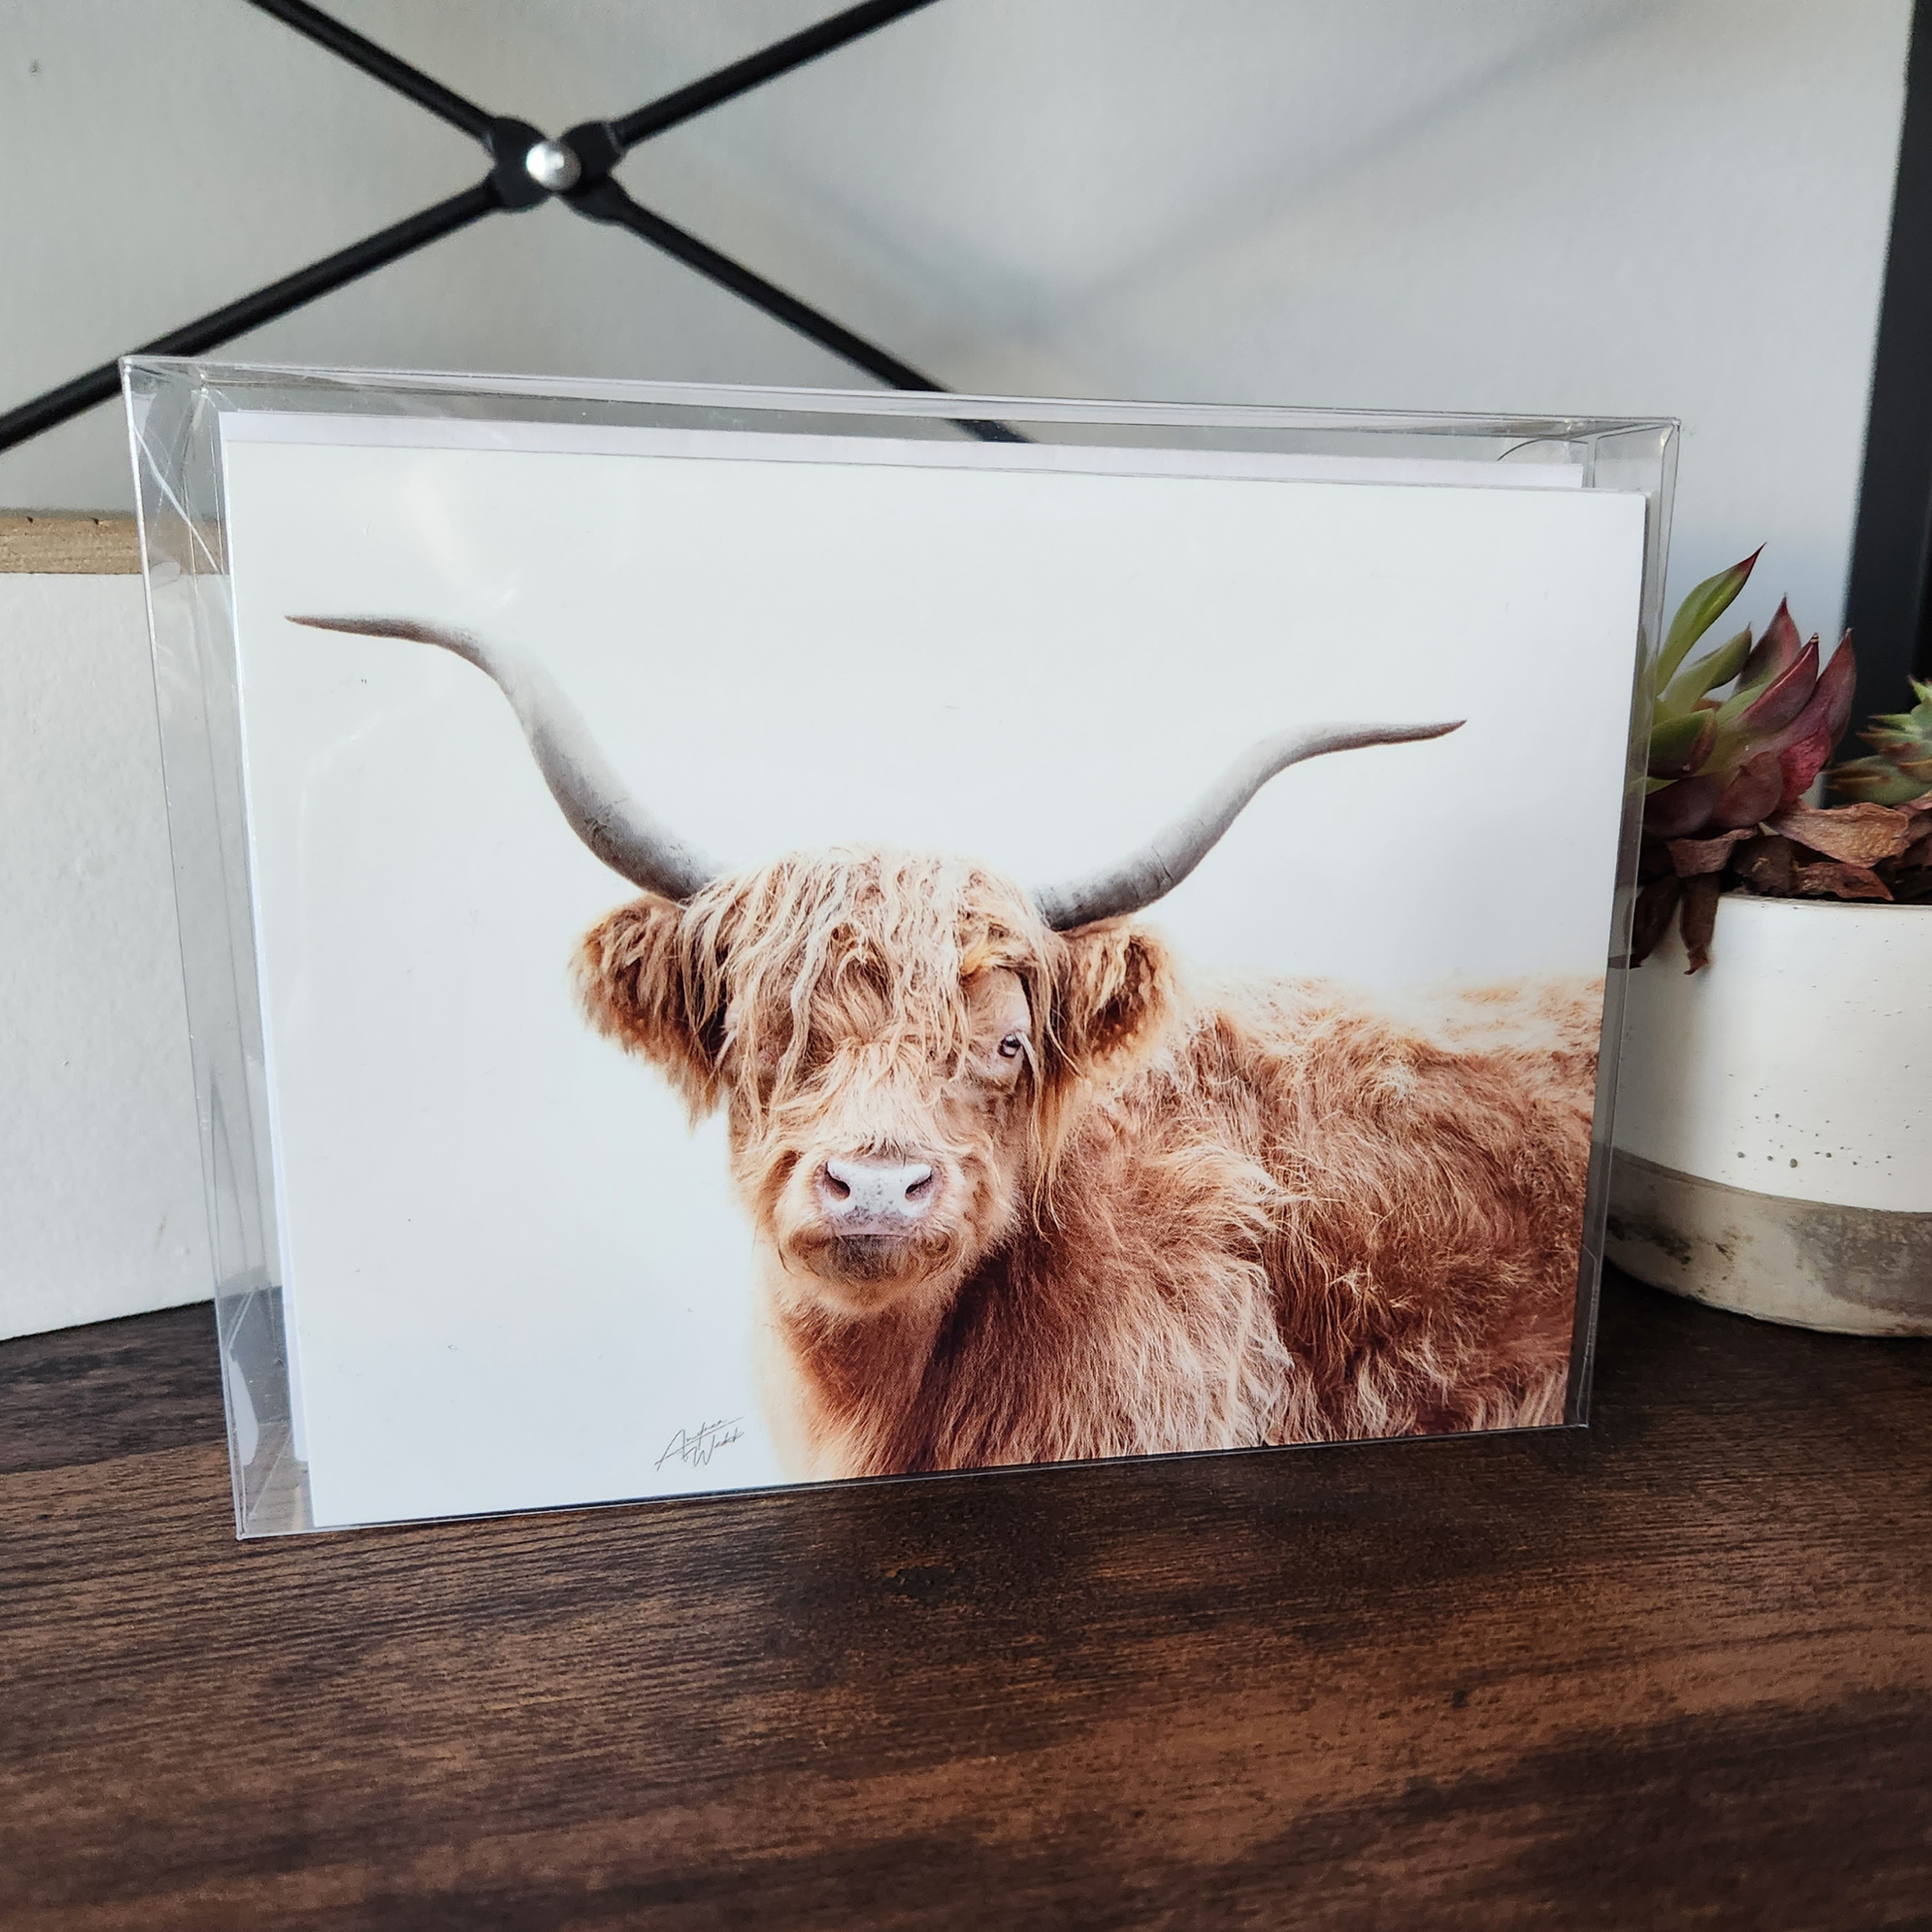 Highland Cow close up stationary, highland cow art, highland cow greeting cards